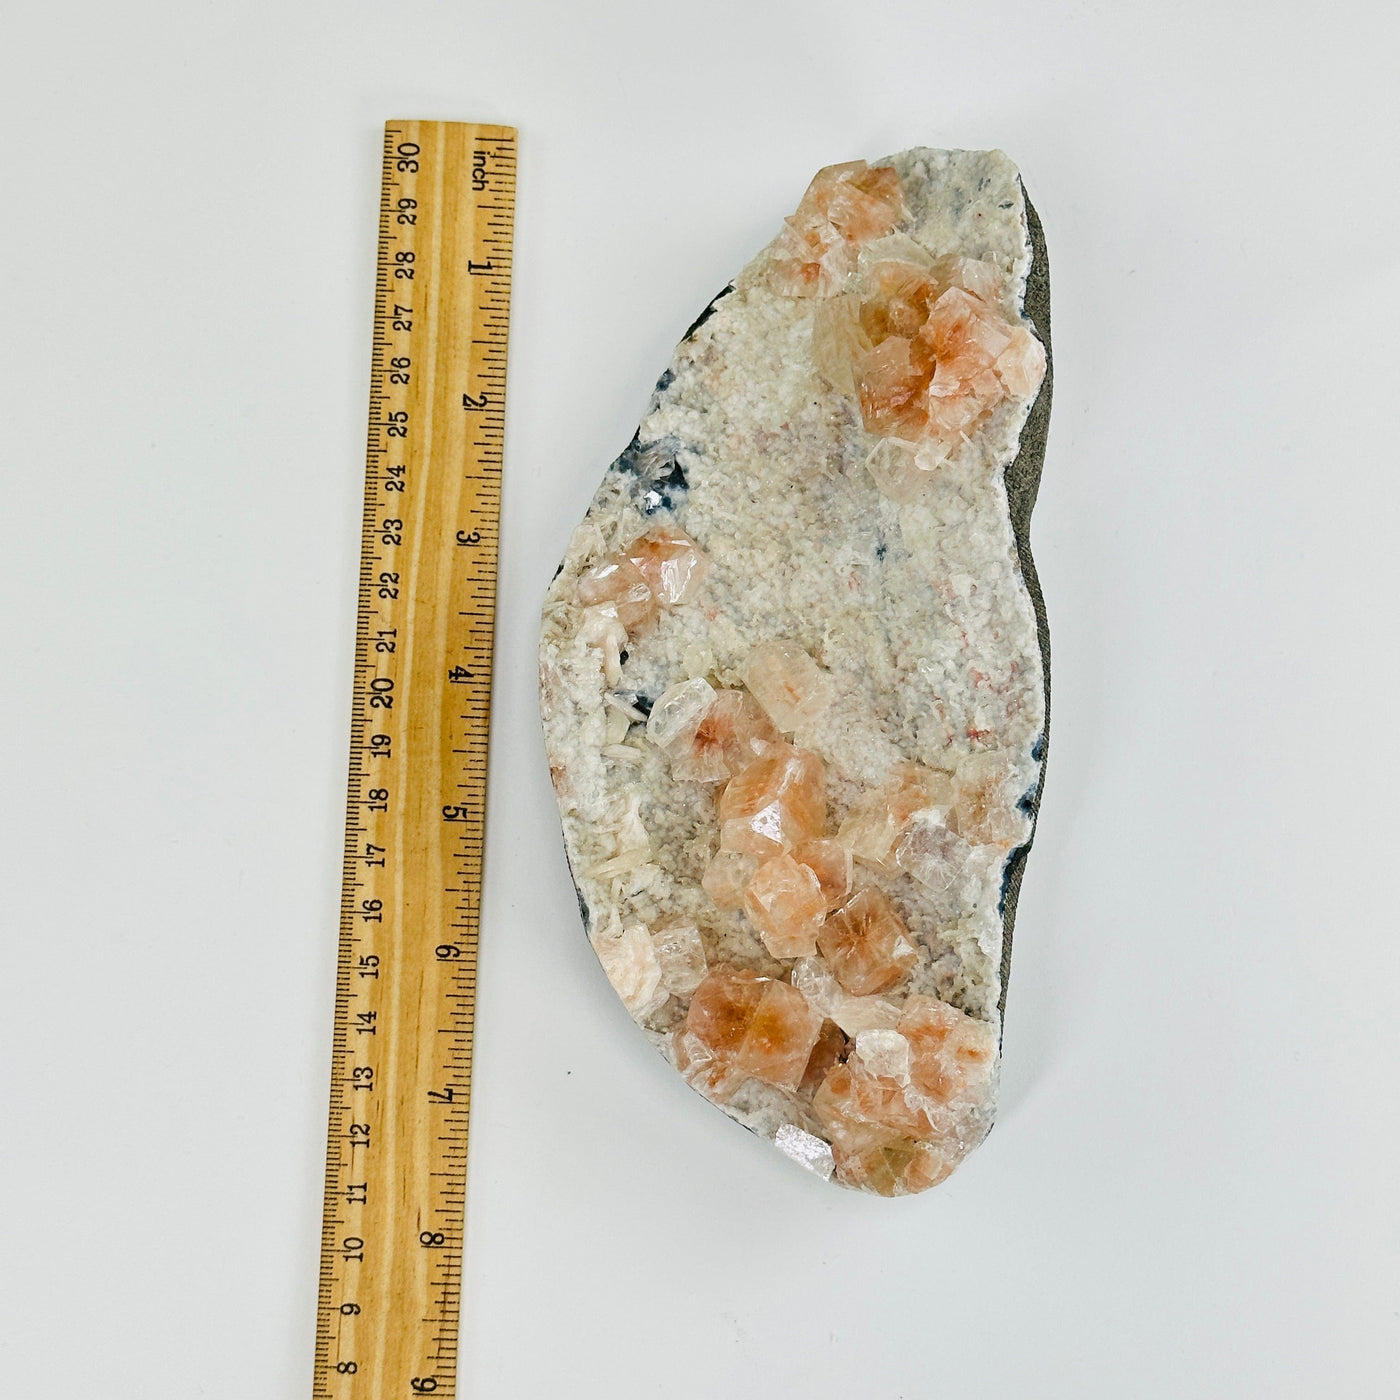 peach apophyllite on matrix next to a ruler for size reference